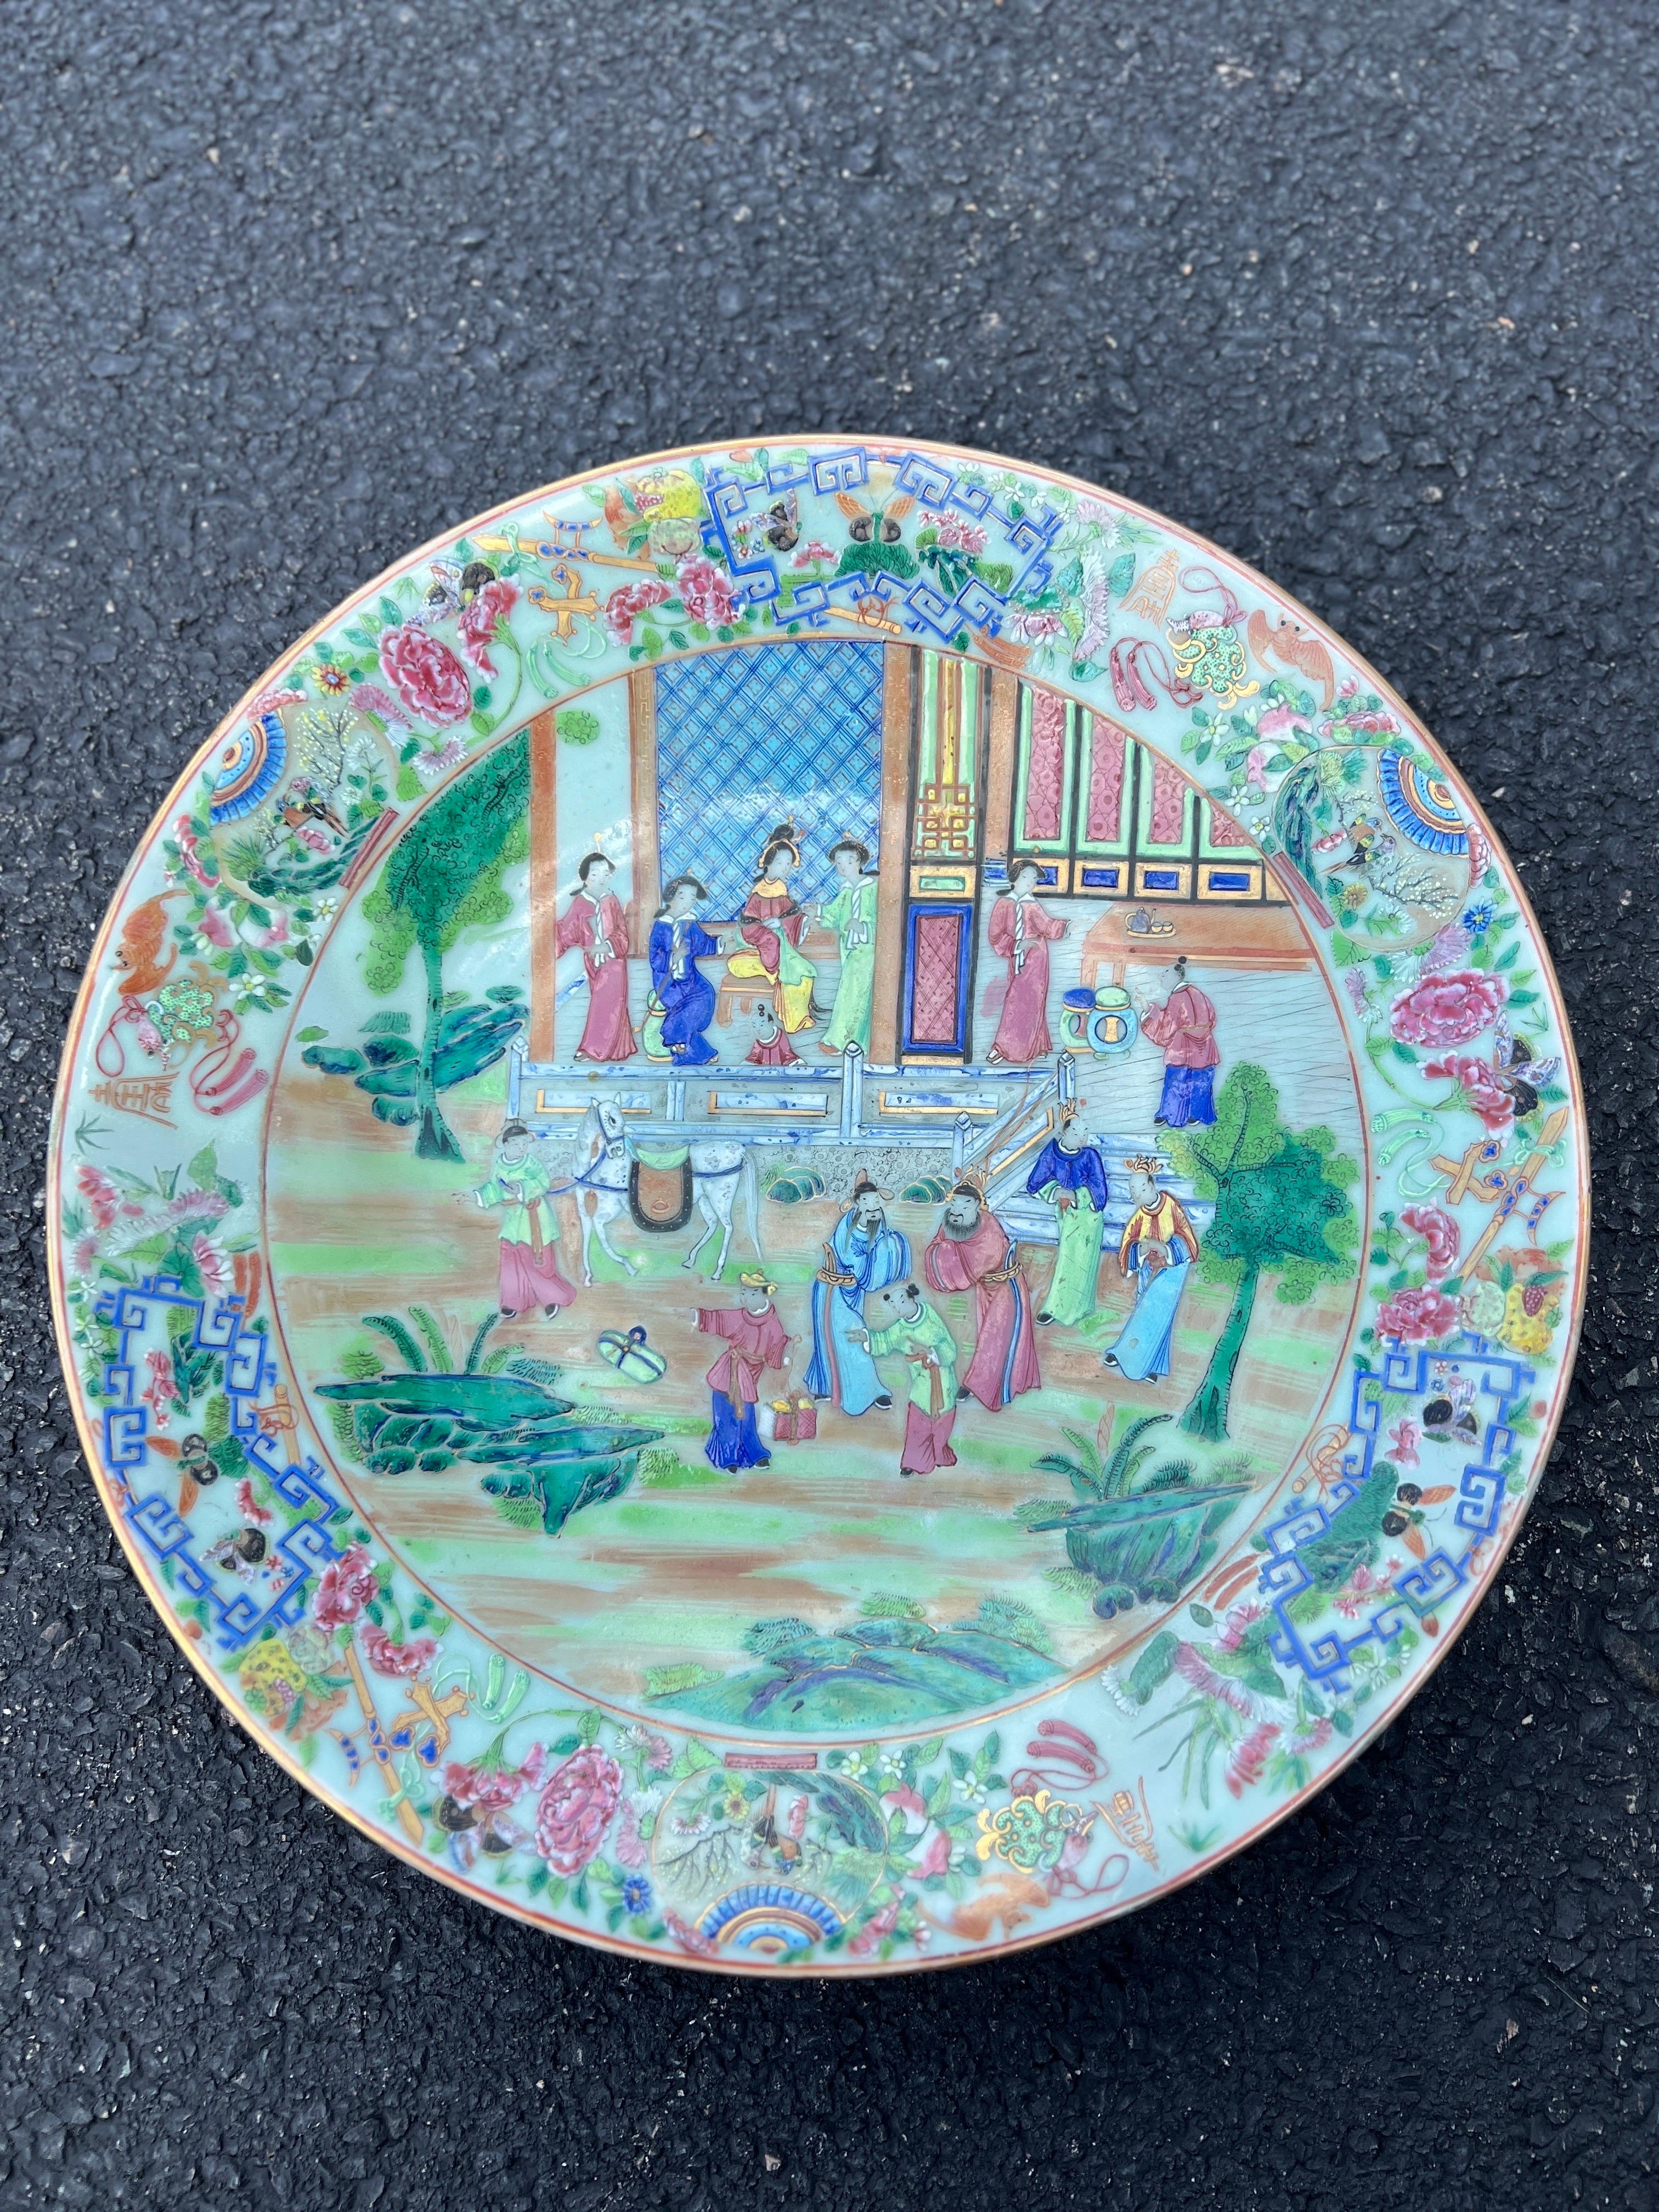 19th Century, Chinese.
This wonderful large platter features enamel painted imperial courtyard figural scenes to the center, vivid butterflies, bats, auspicious symbols, flowers and precious objects to the exterior rim. All hand decorated on a